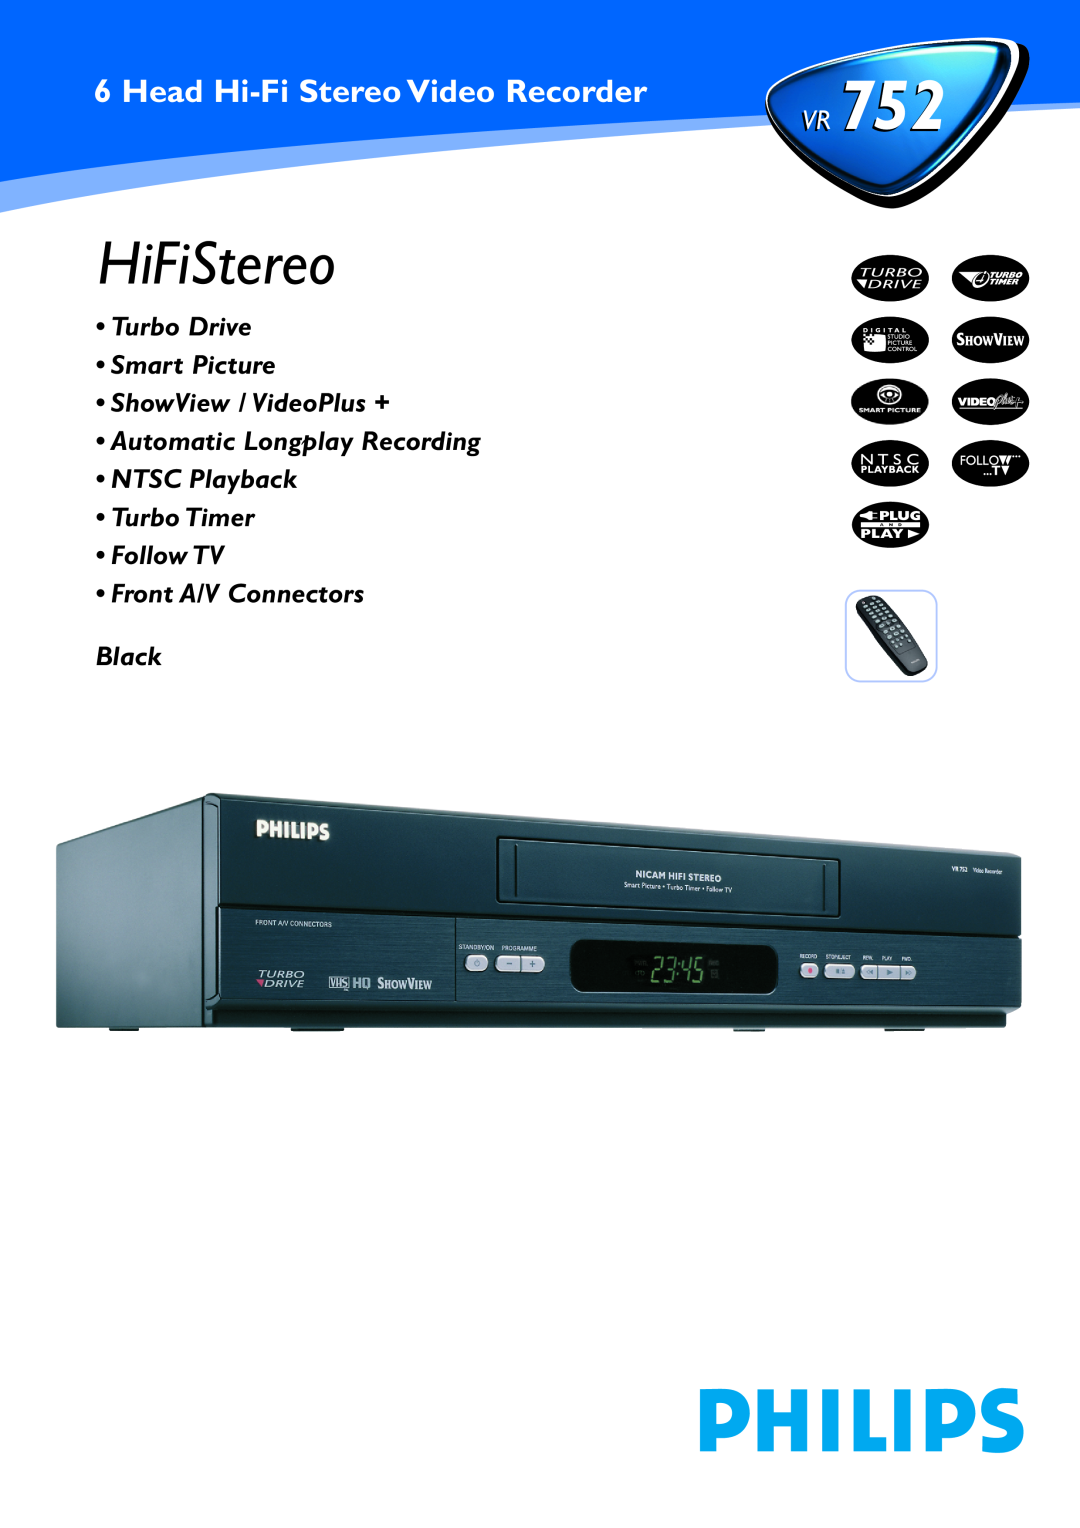 Philips VR 752VR manual HiFiStereo, Head Hi-FiStereo Video Recorder752, Turbo Drive Smart Picture, ShowView / VideoPlus + 